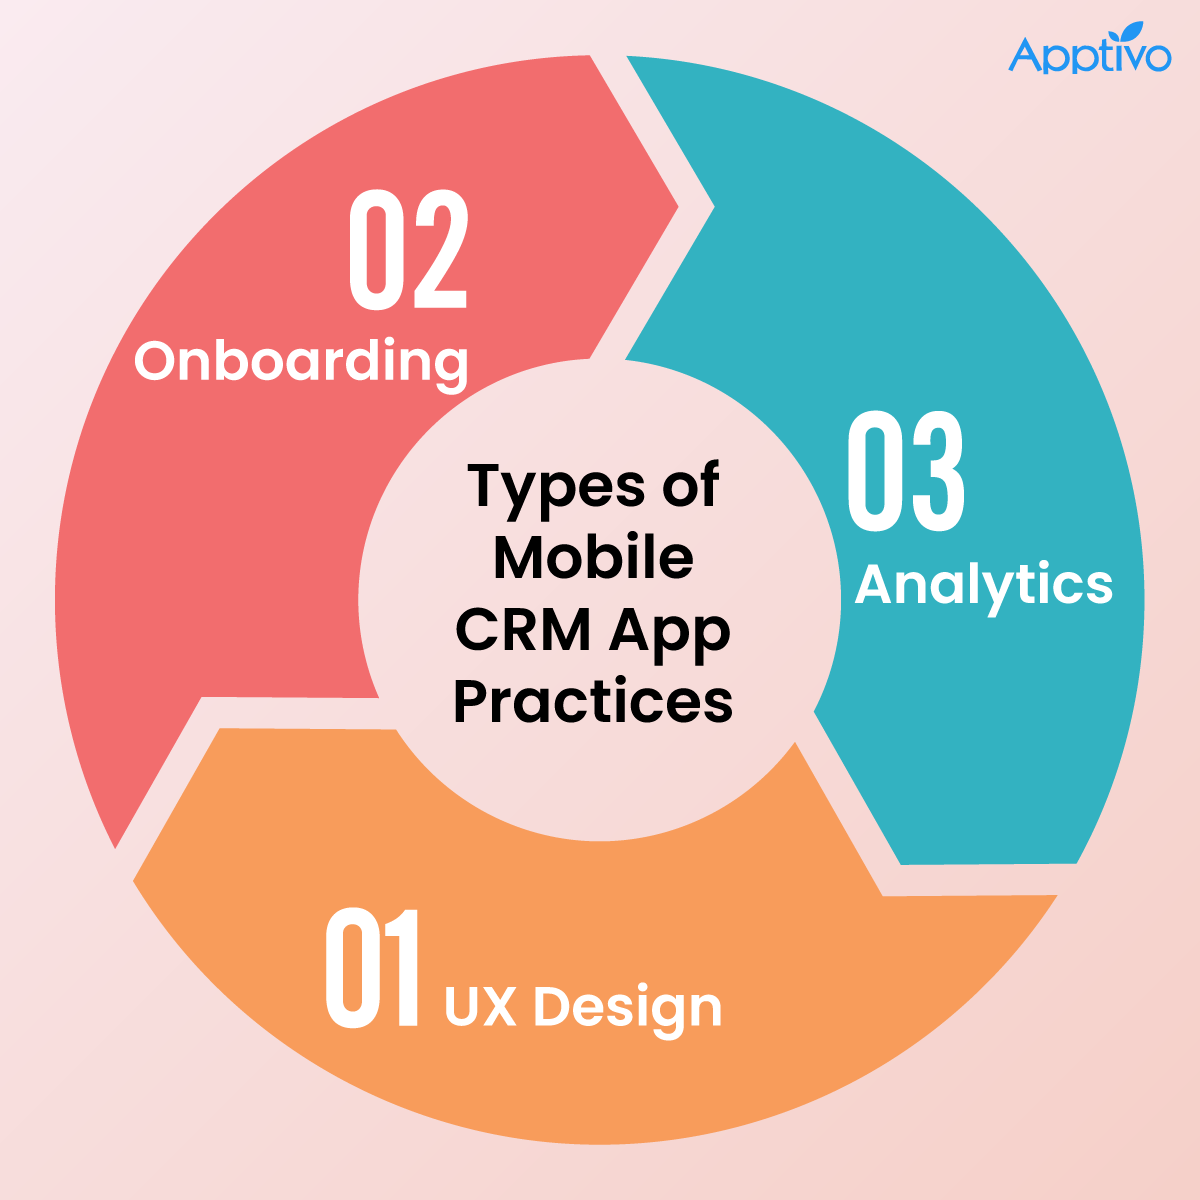 Types of Mobile CRM Practices